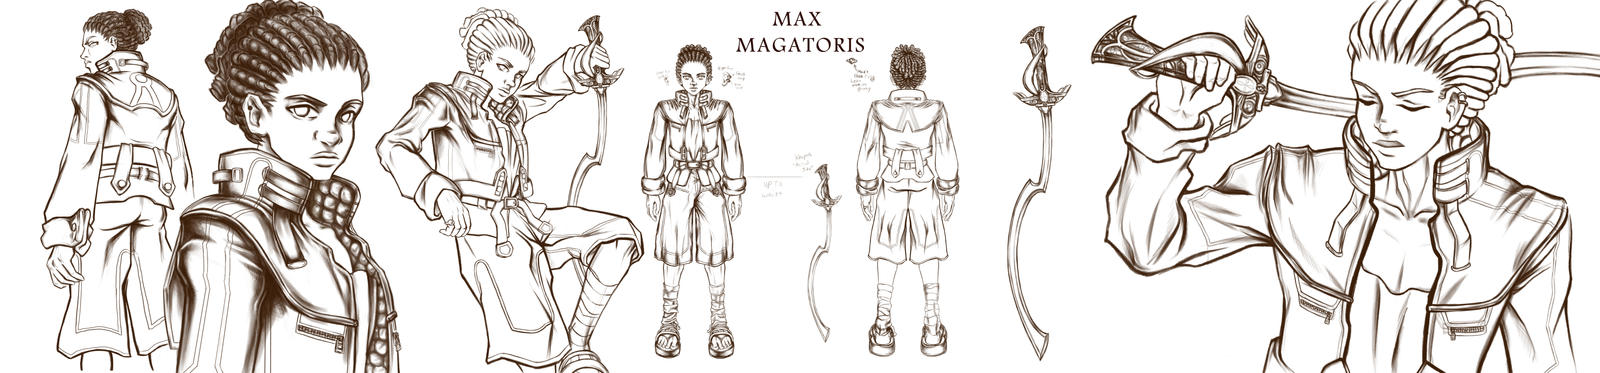 Character Concept: Max